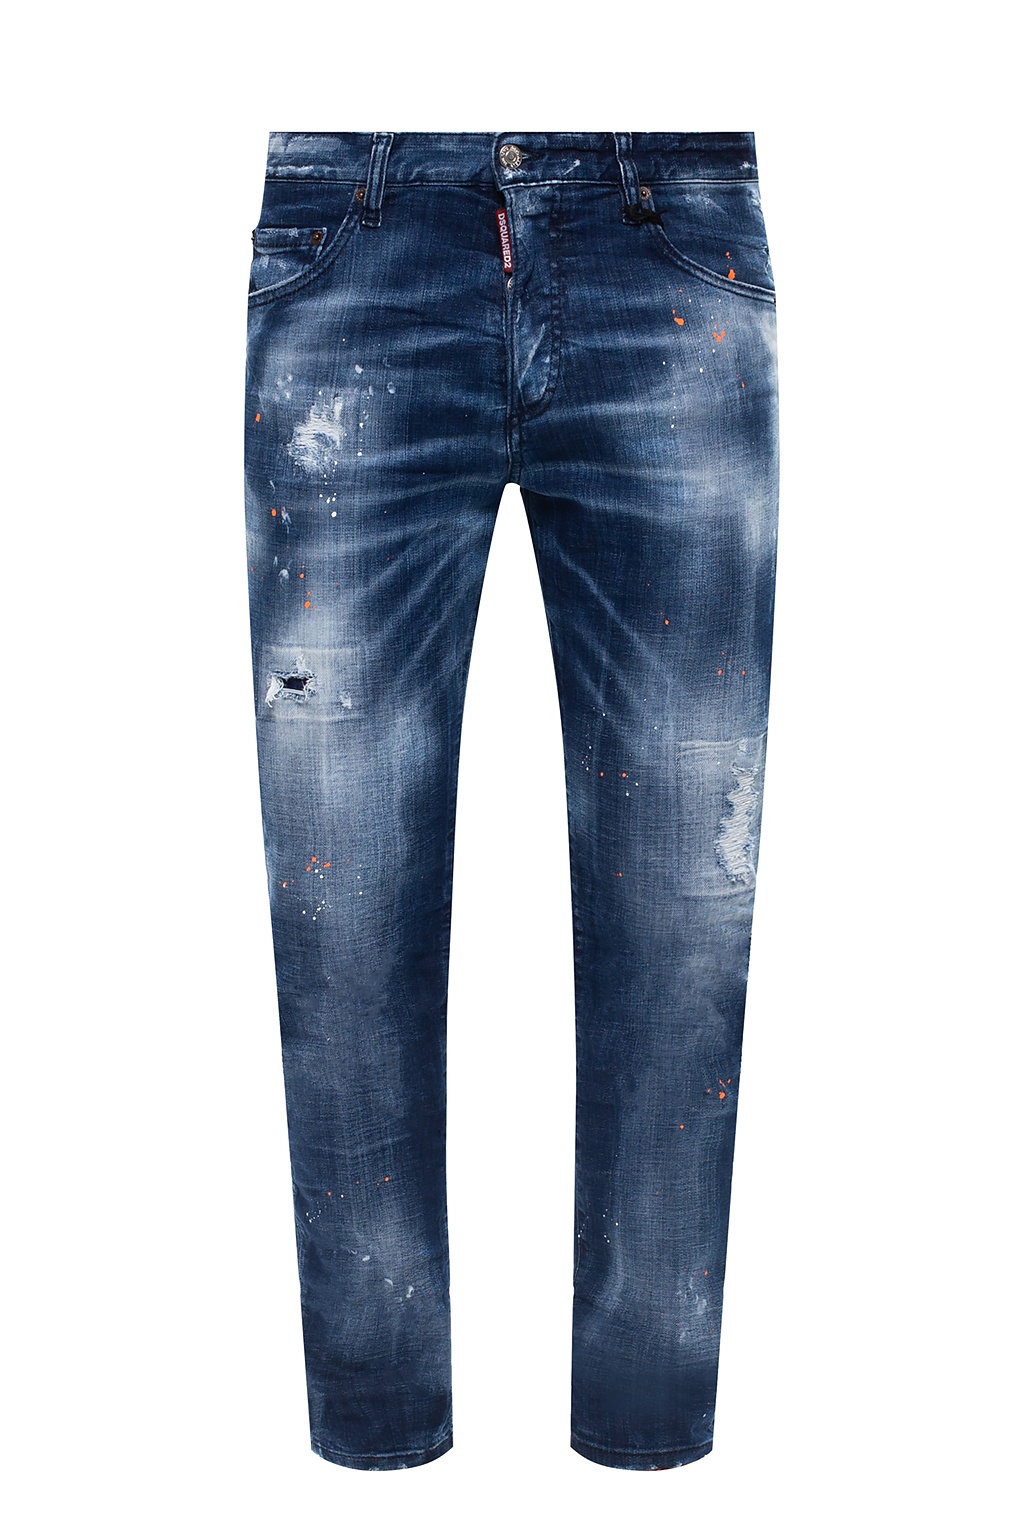 dsquared mens jeans size guide